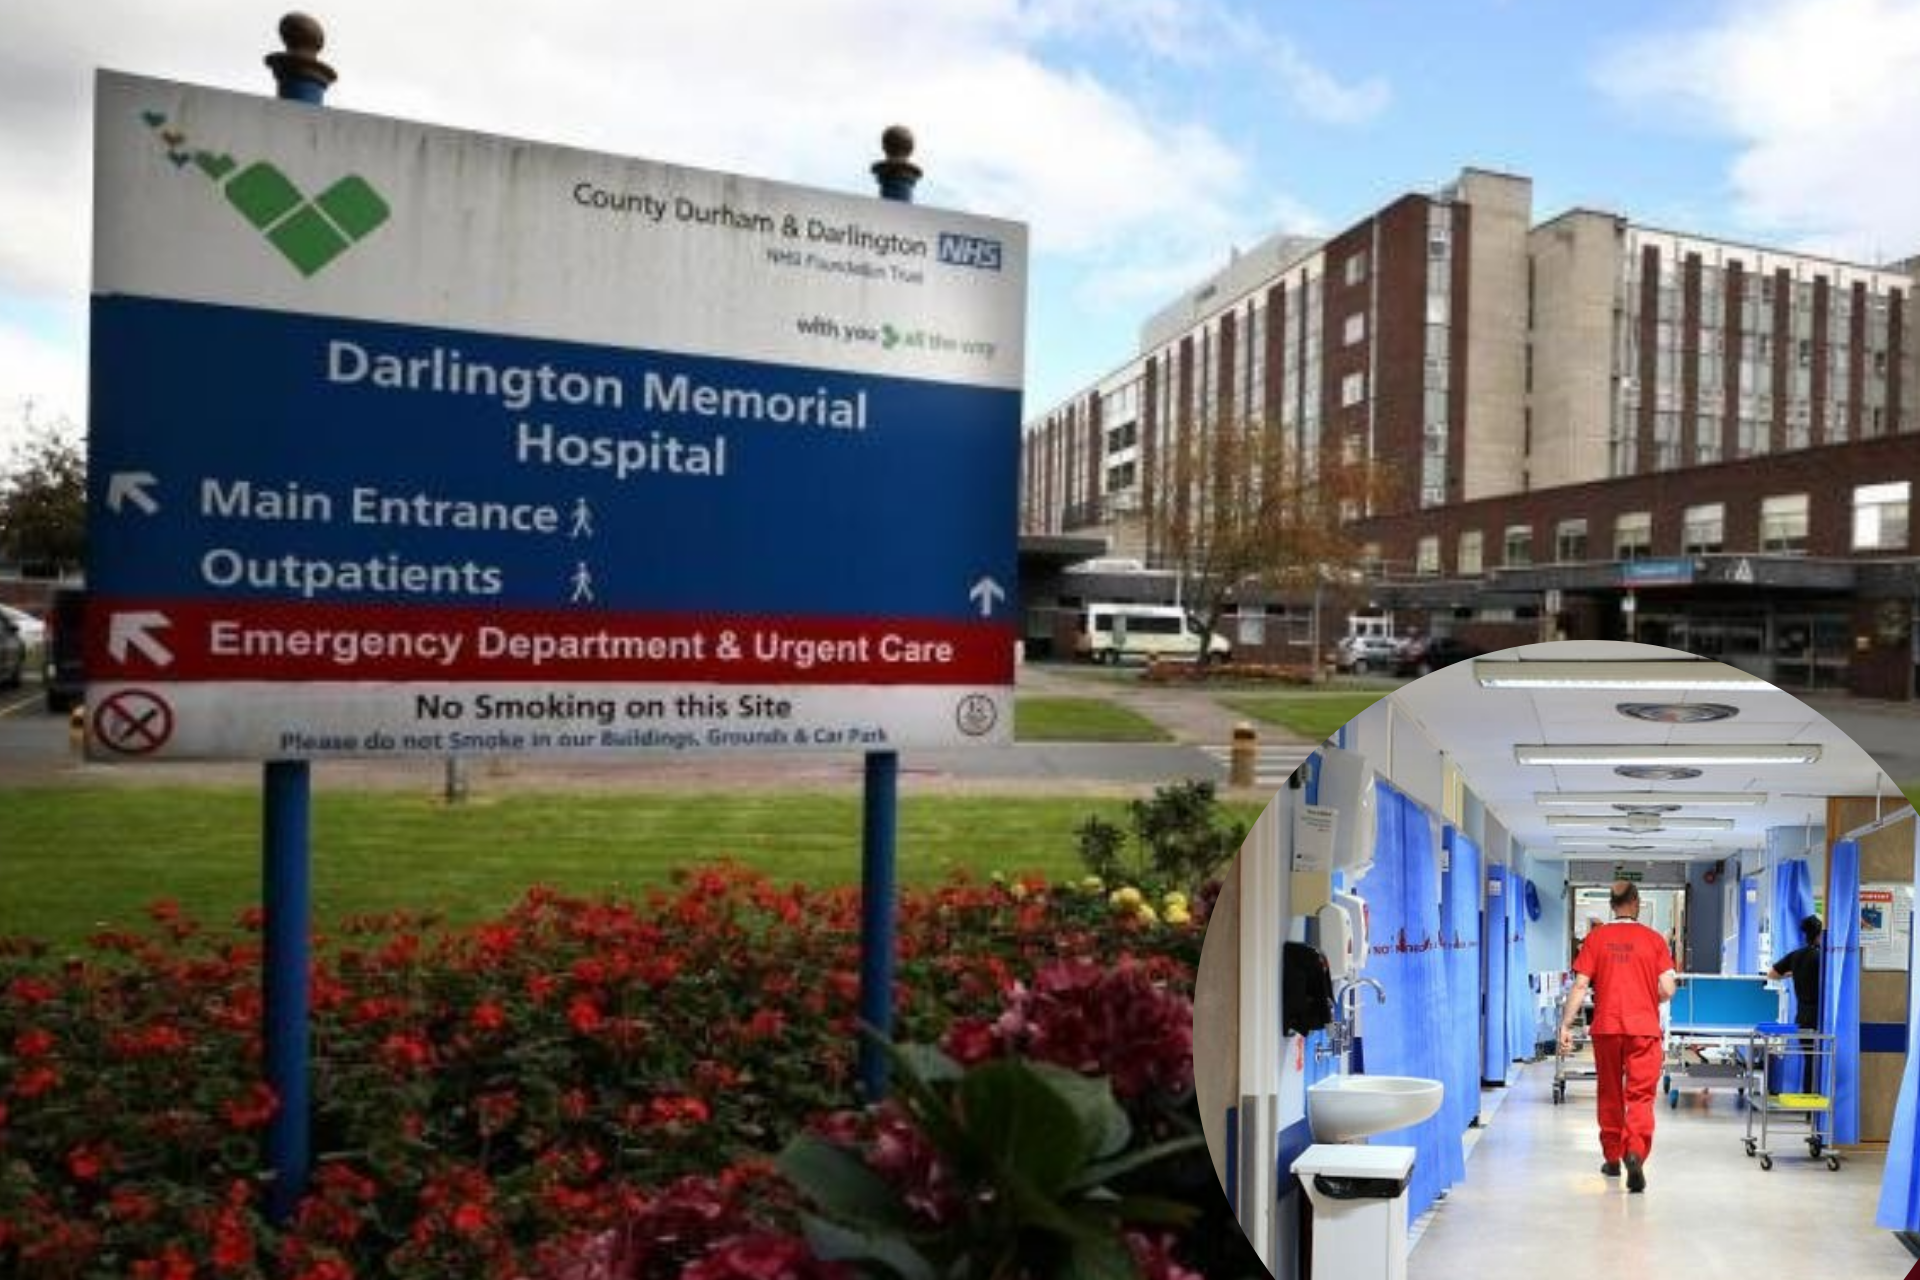 NHS Trust across County Durham and Darlington handed out £32m in claims costs